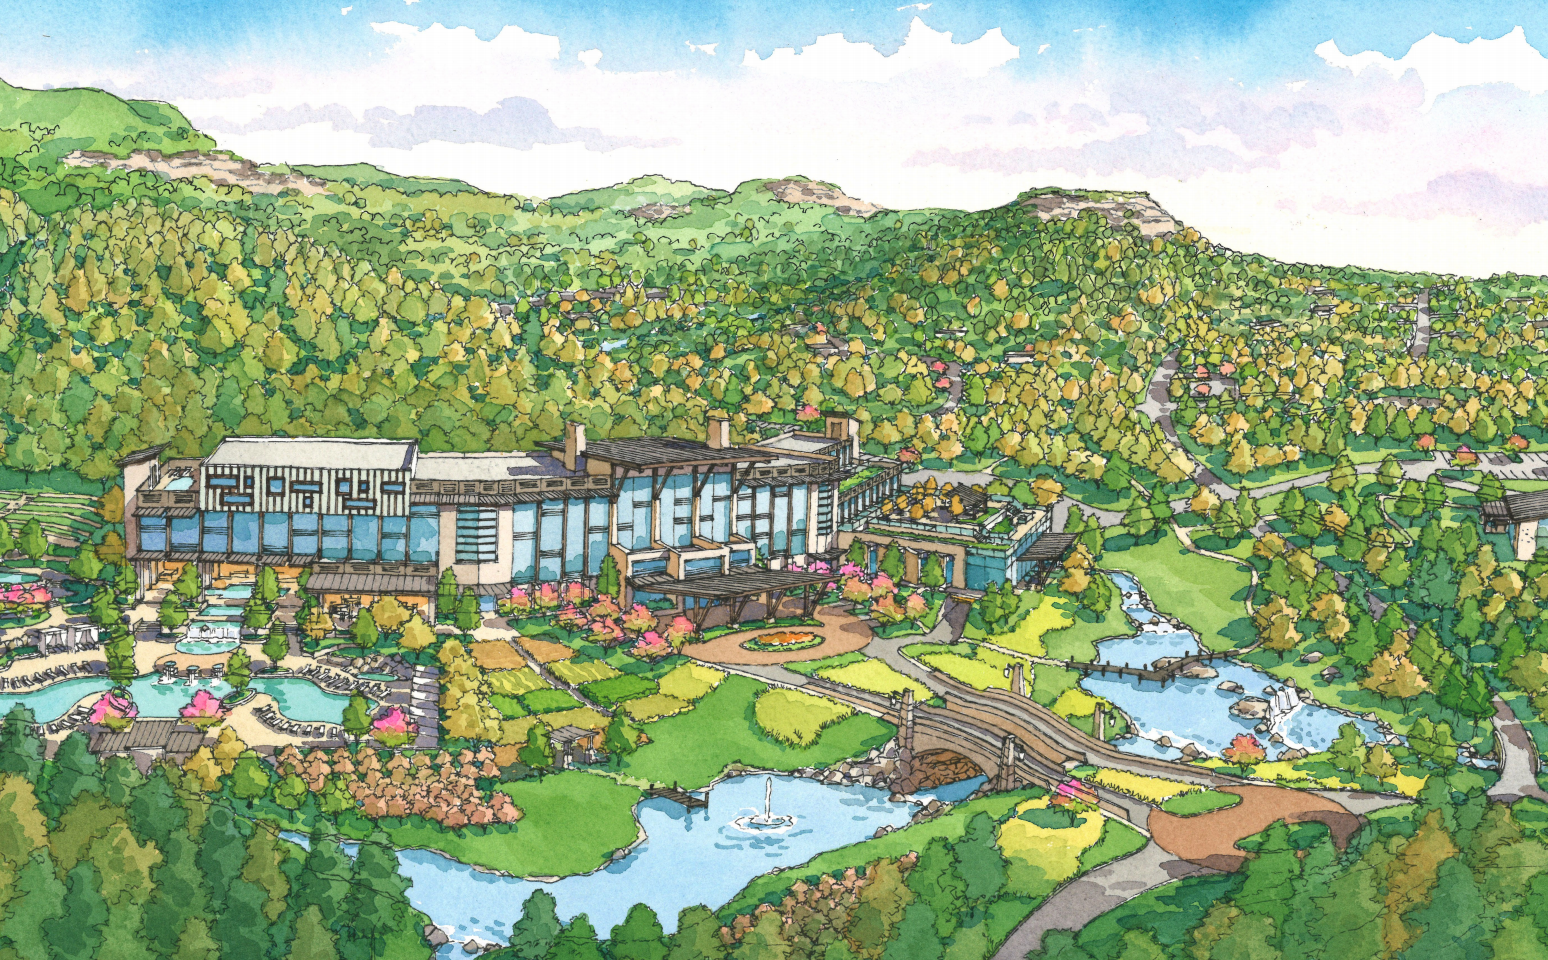 Drawing of "destination resort" proposed for 900-privately owned acres in the Red River Gorge